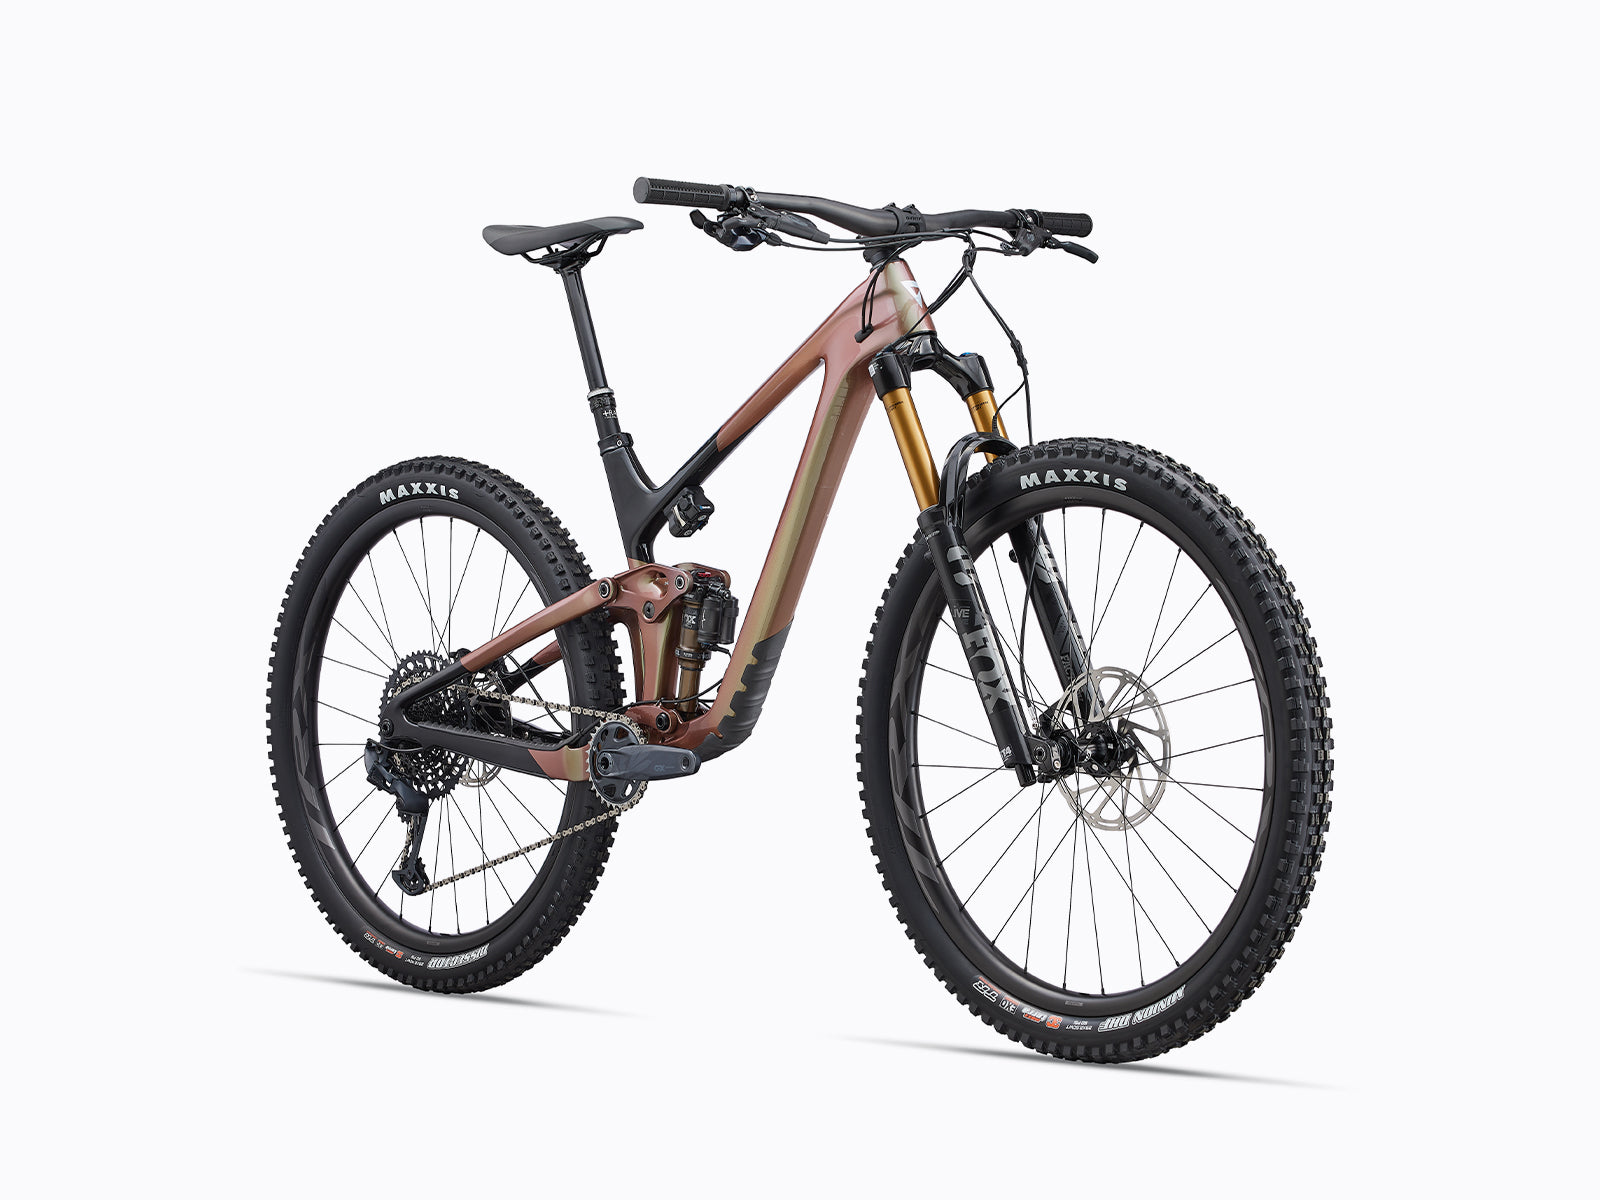 image features the Giant trance X advanced pro 29 1, a hardtail mountain bike perfect for when you need a downhill mountain bike. Now available at Giant Melbourne, an Australian bike shop.